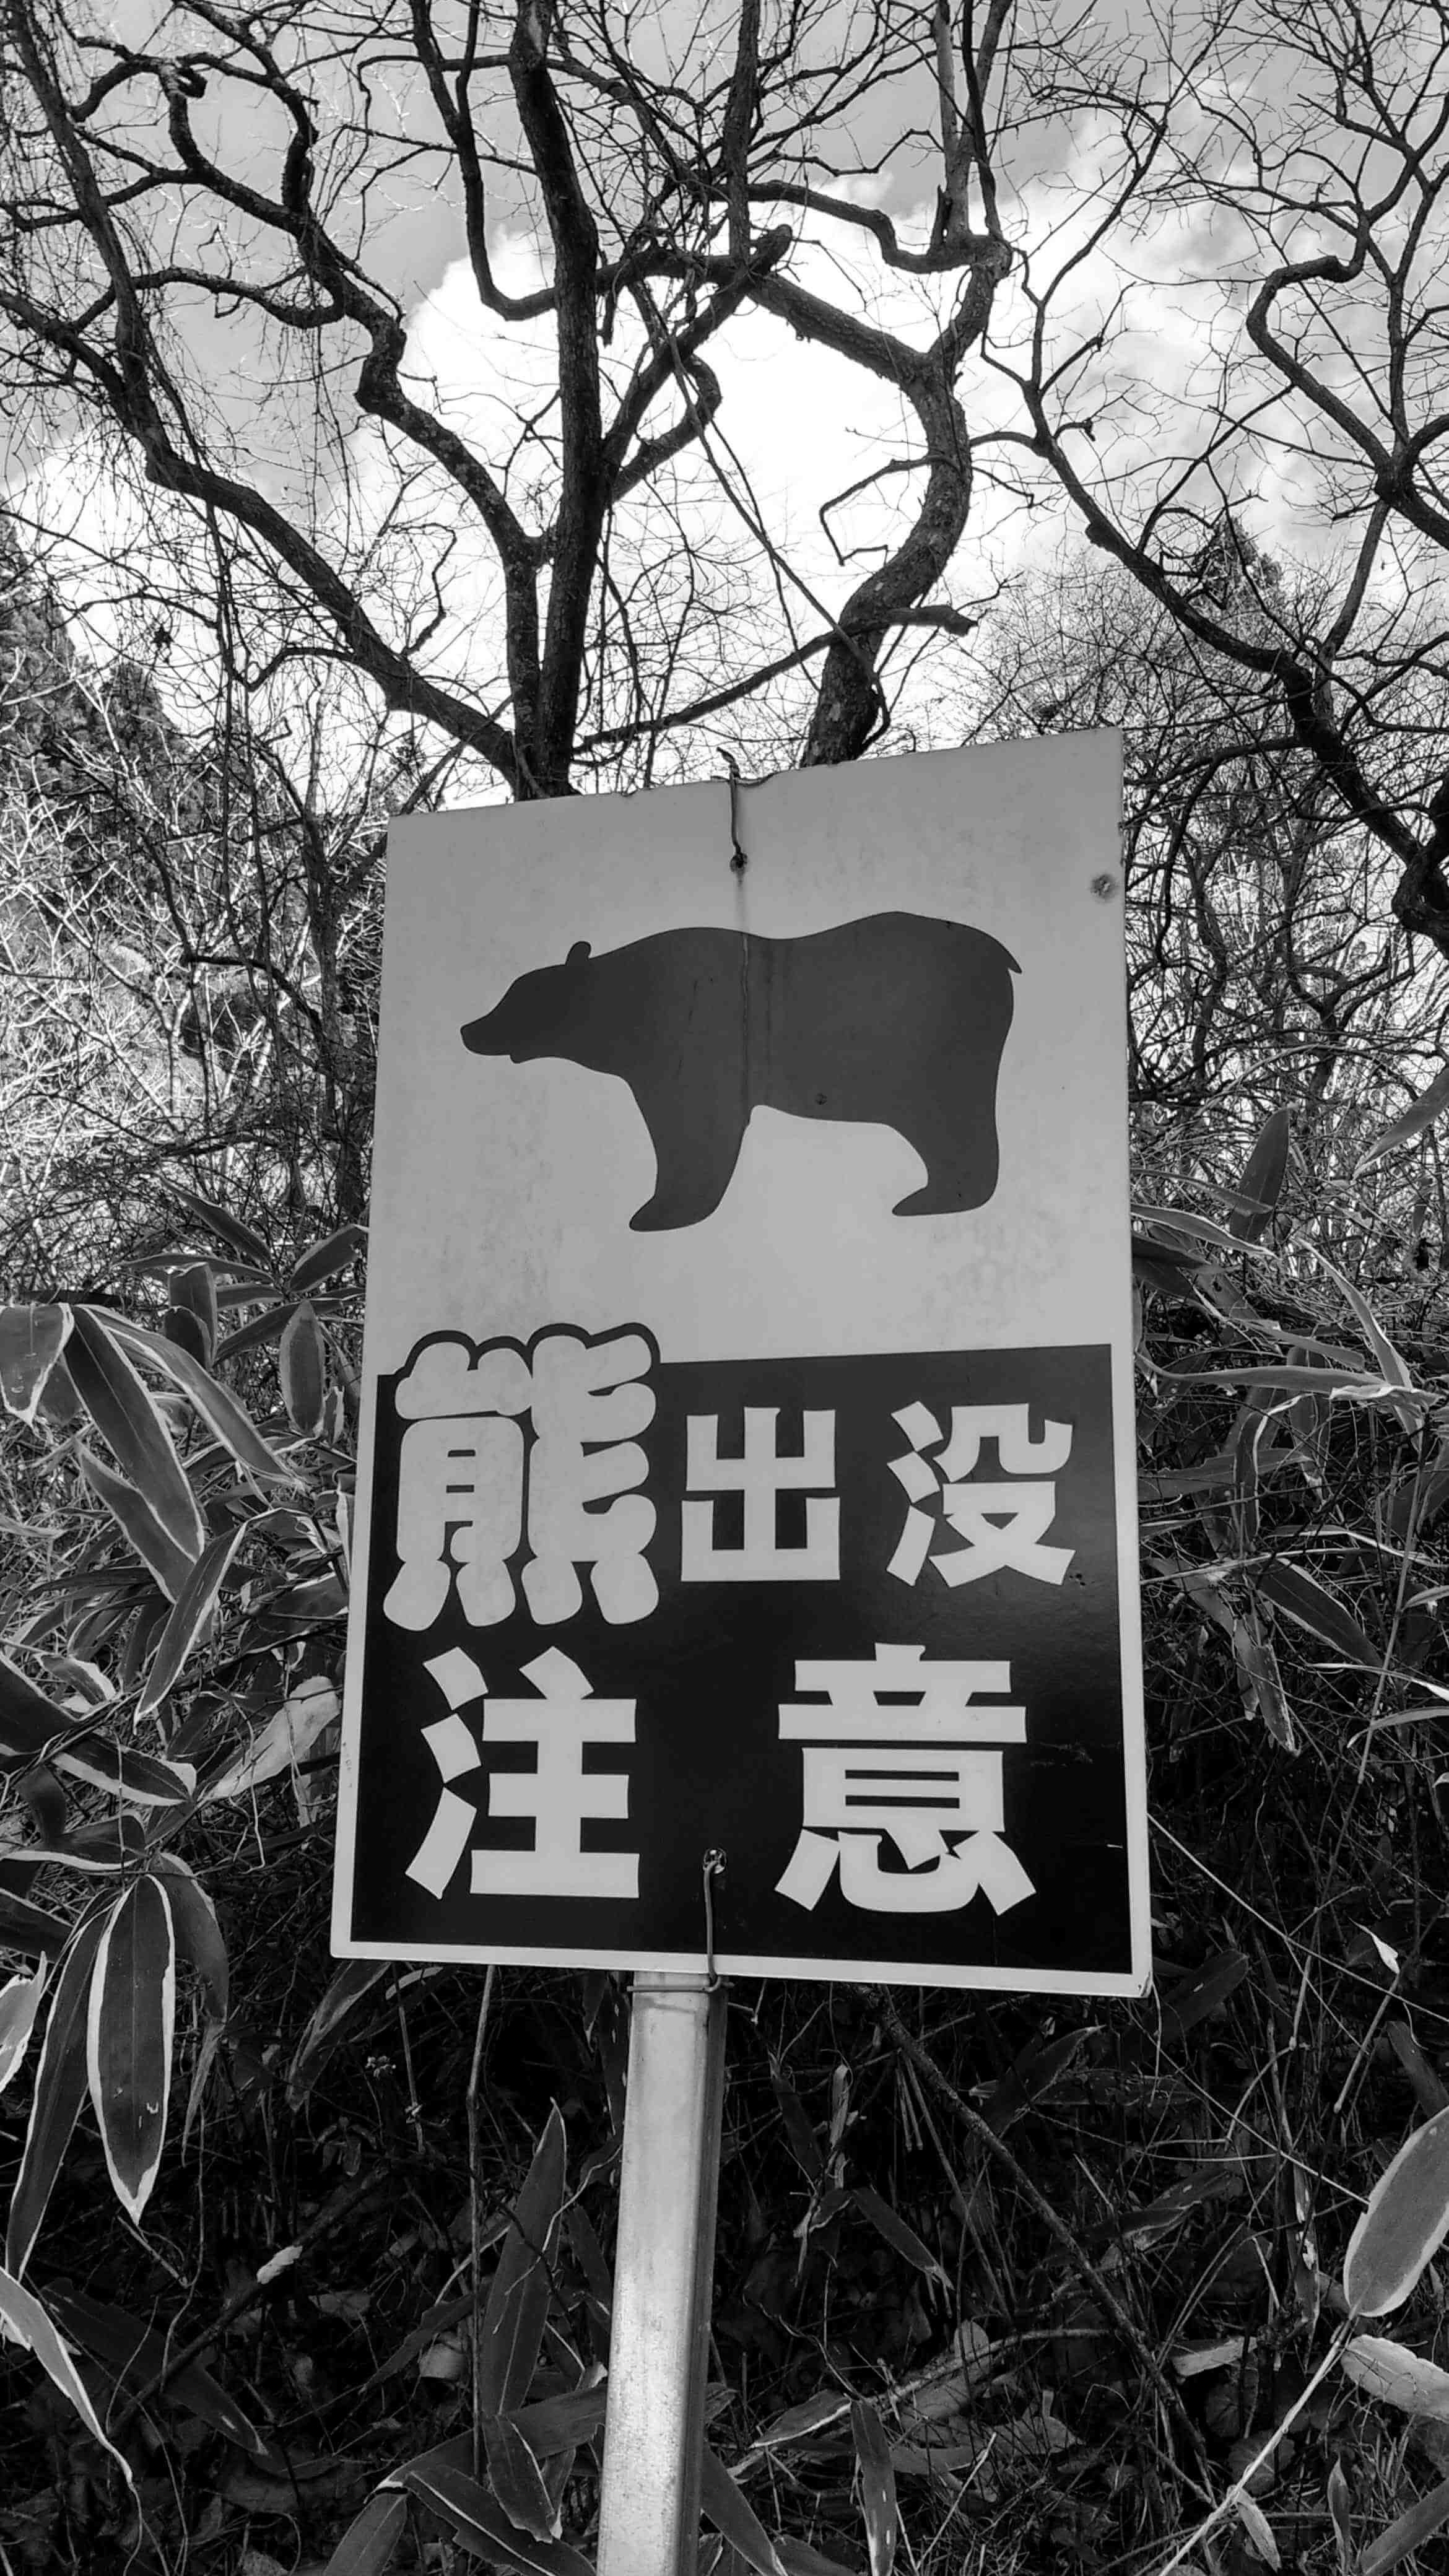 A sign warning about bears